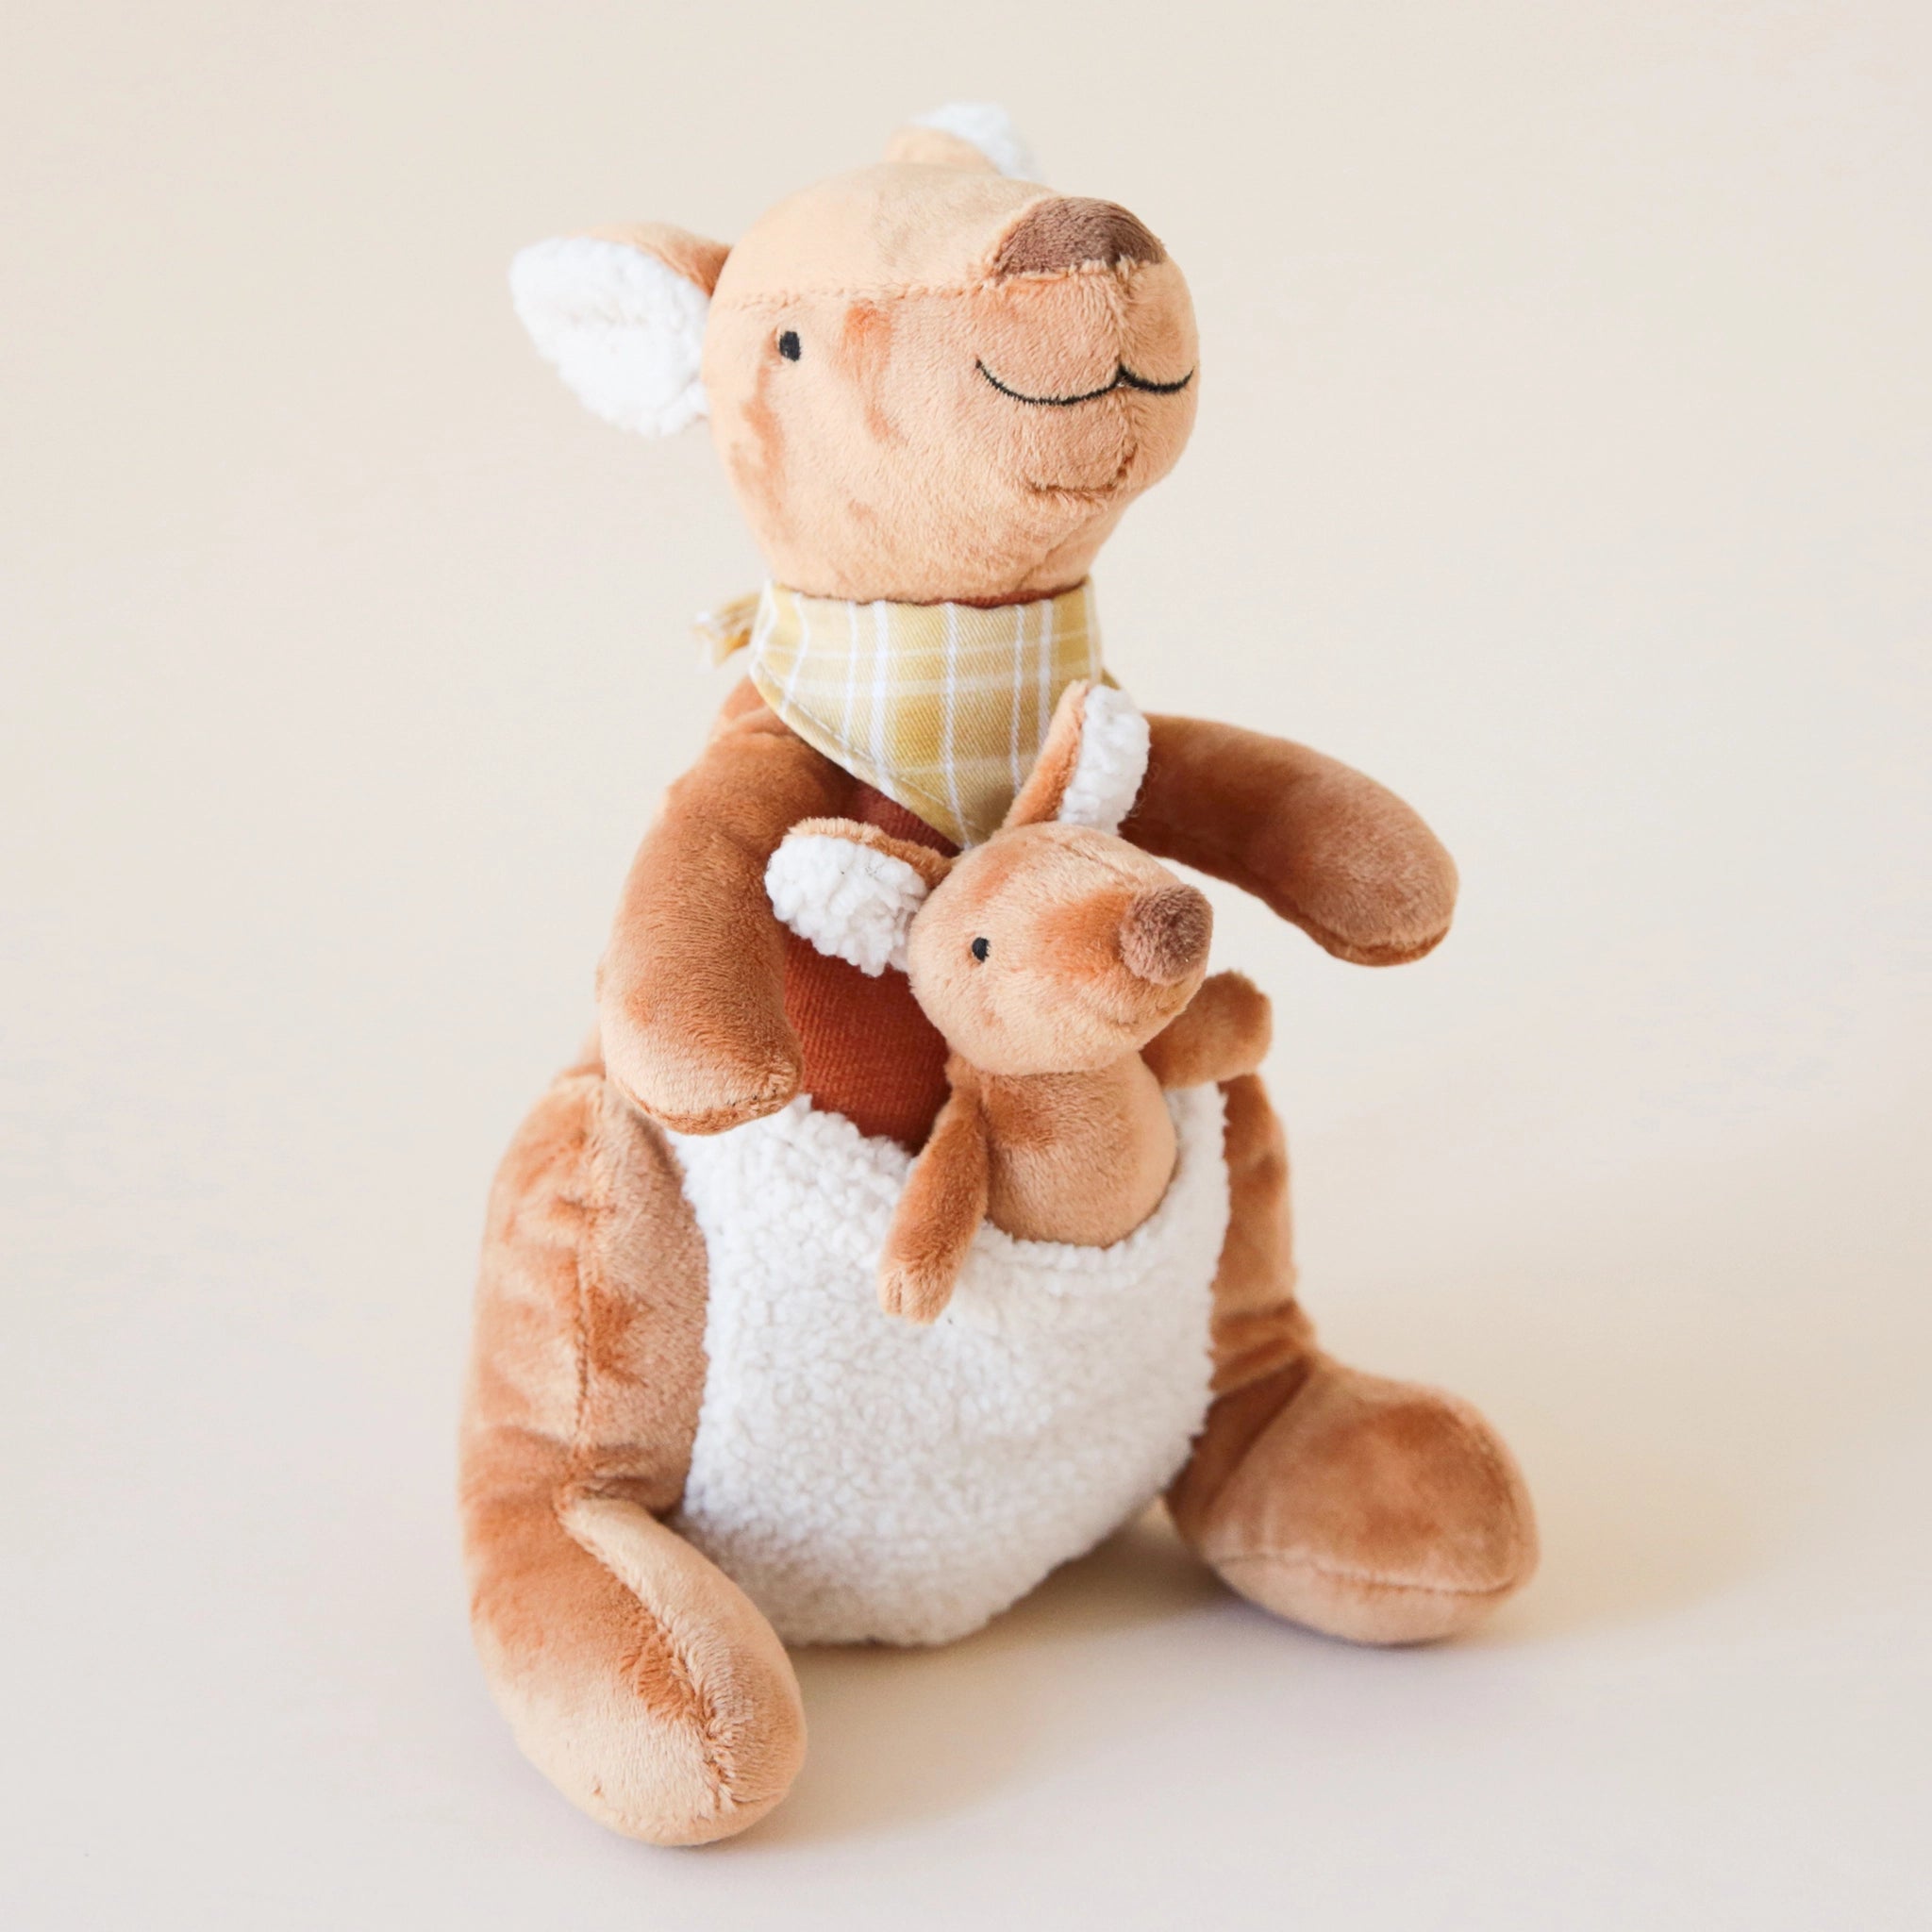 A kangaroo mama and a baby kangaroo stuffed animal with a cream pocket in the front and a tan/brown body.